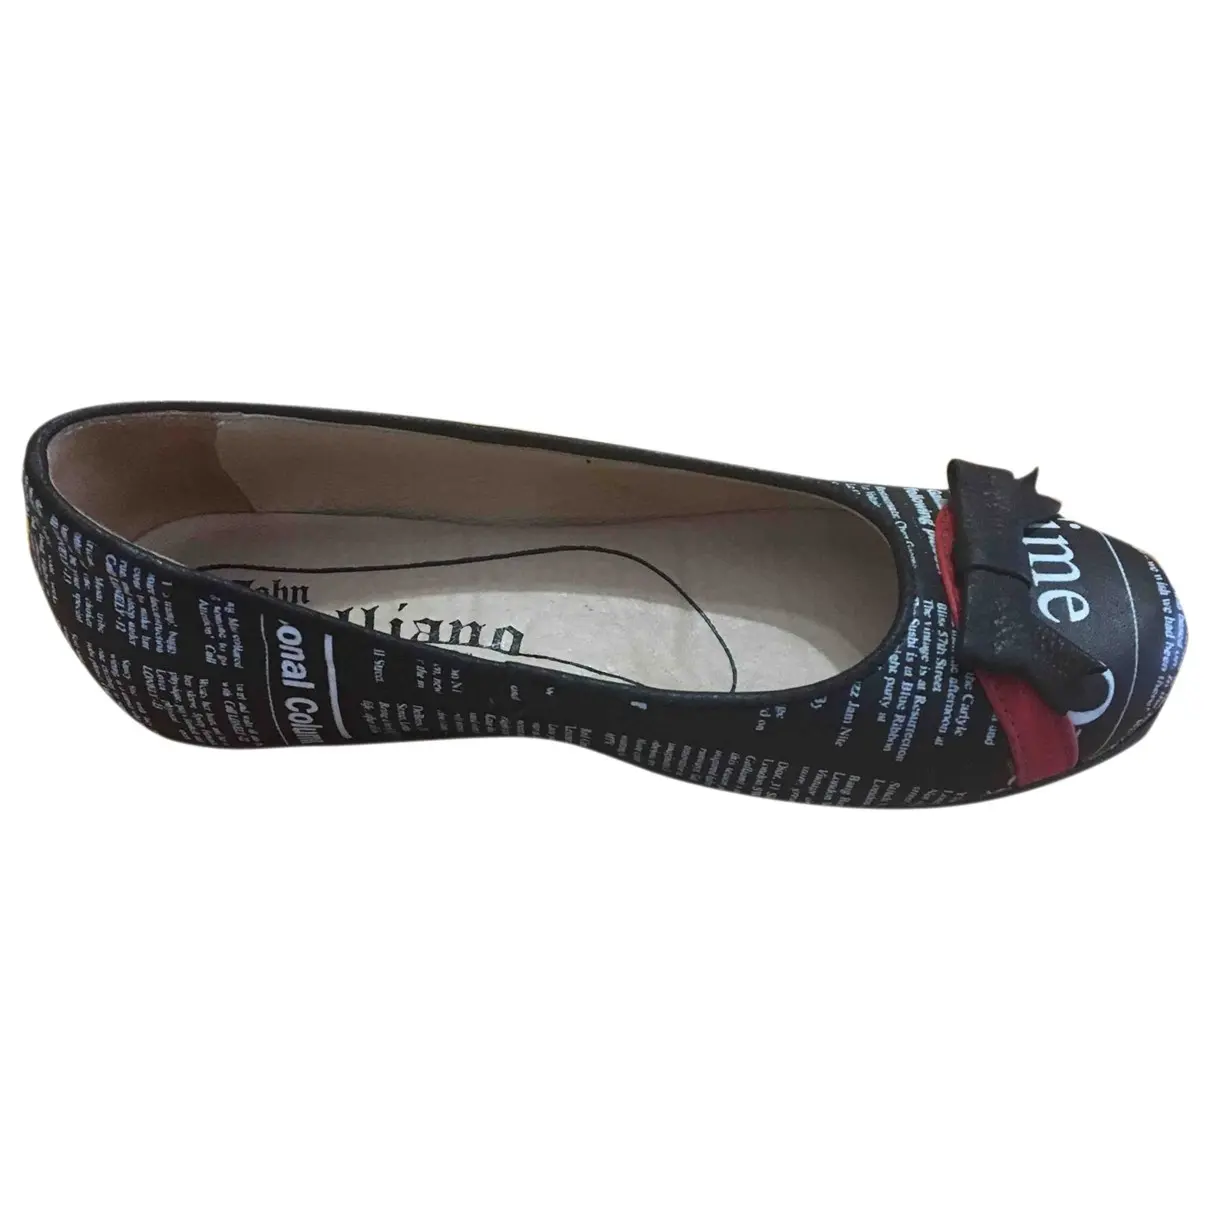 Leather ballet flats Galliano